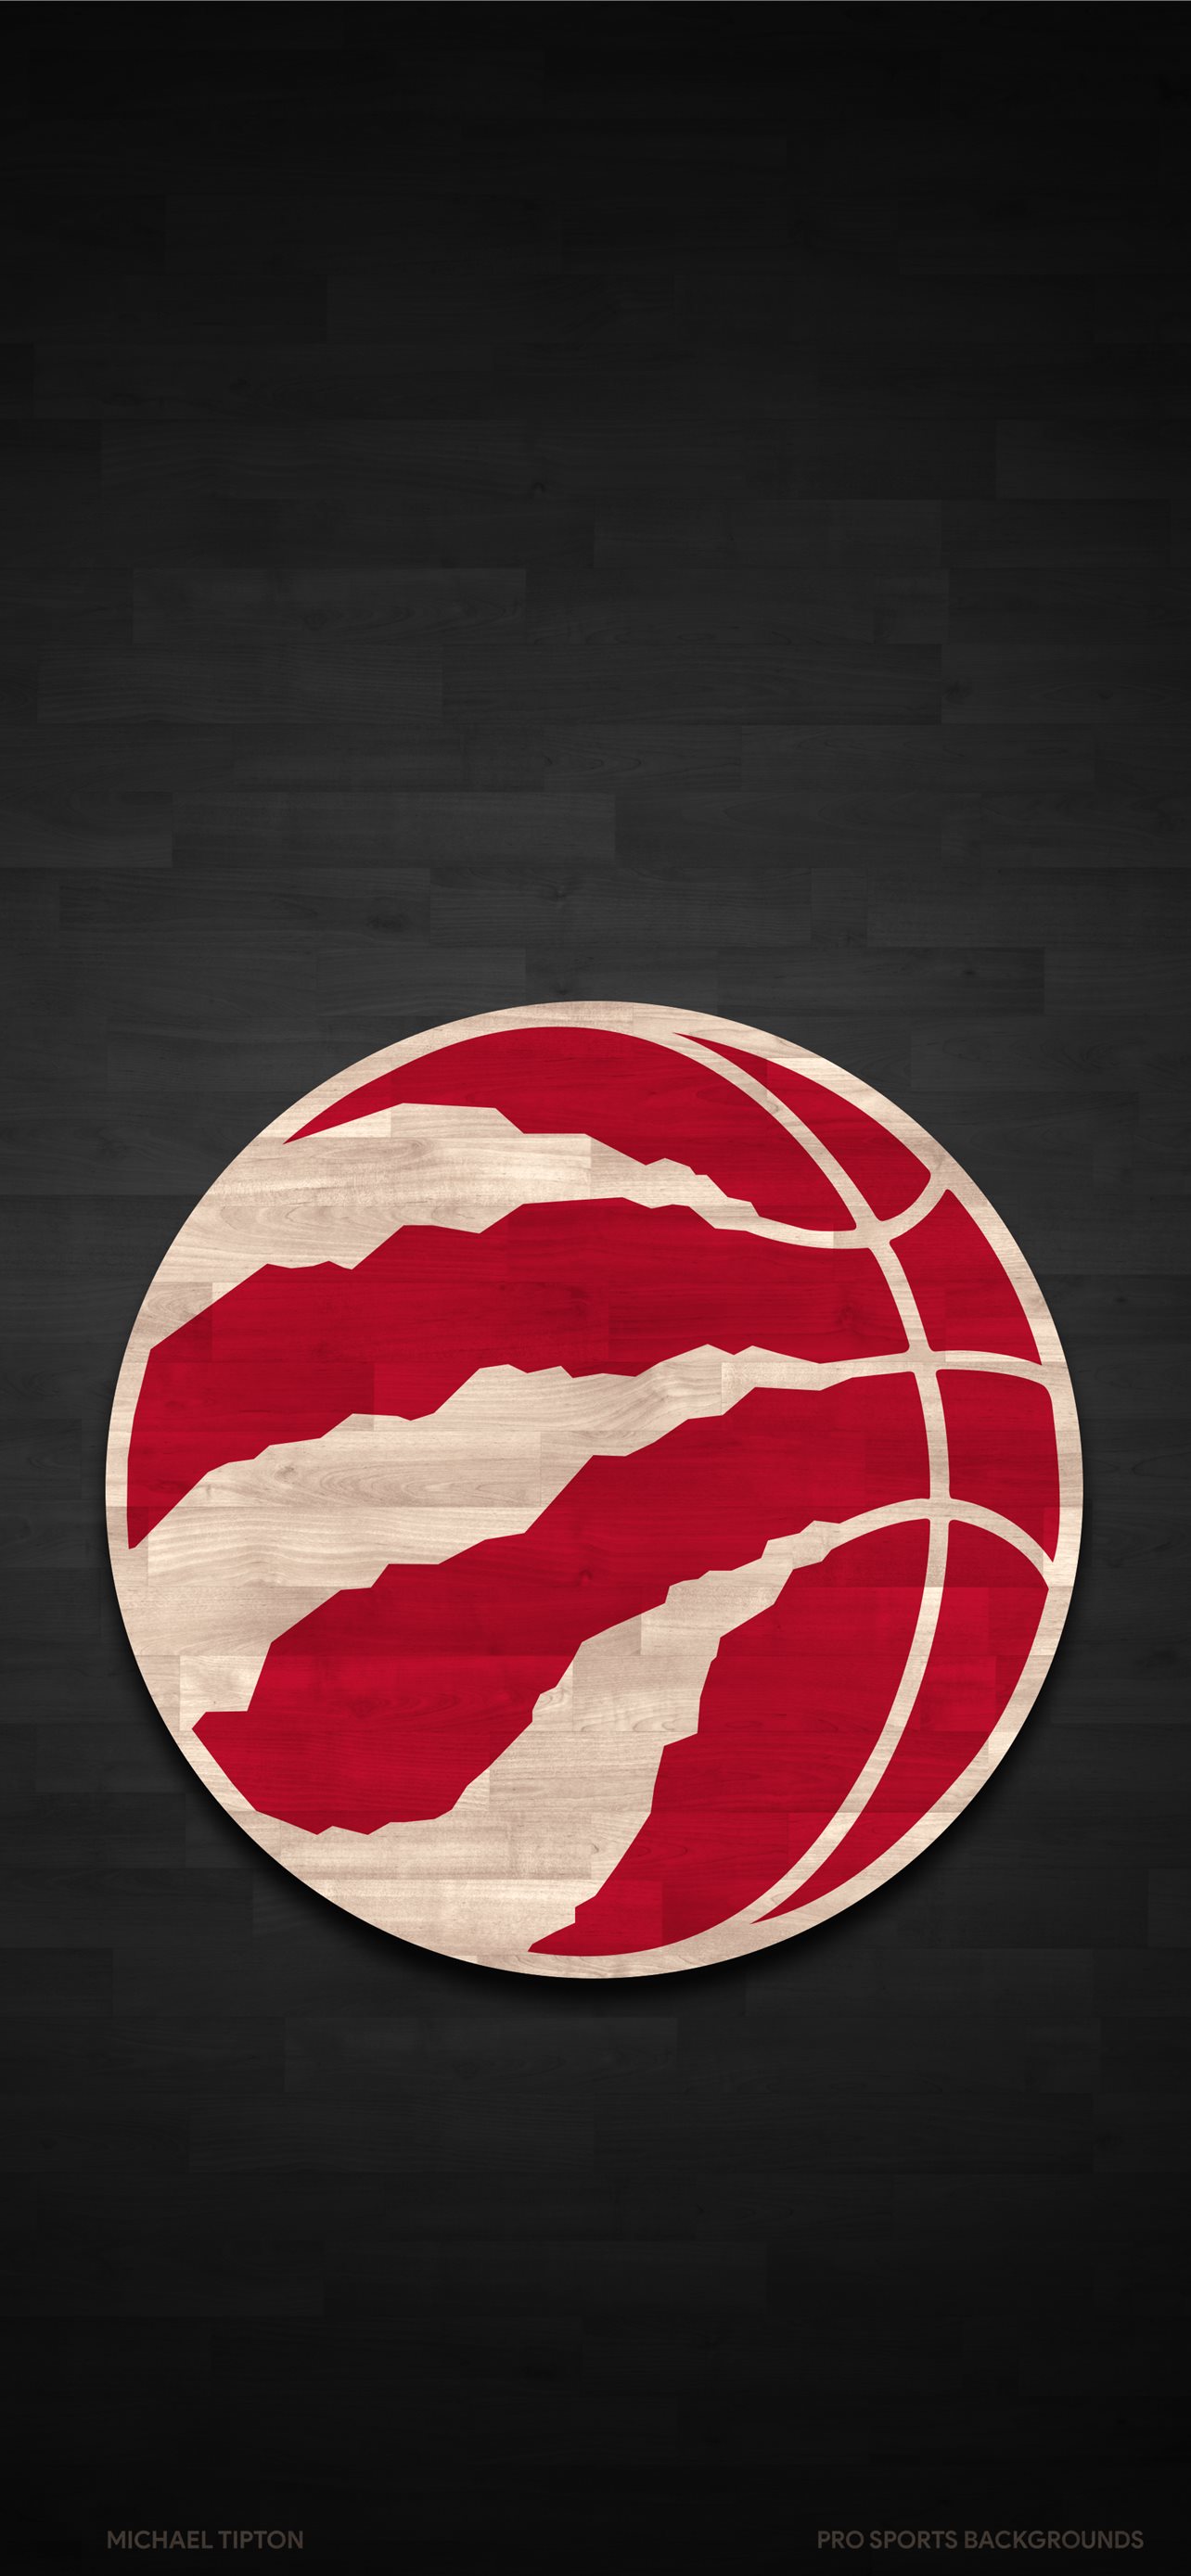 Created Some Toronto Raptors Phone Wallpapers Added iPhone and Desktop